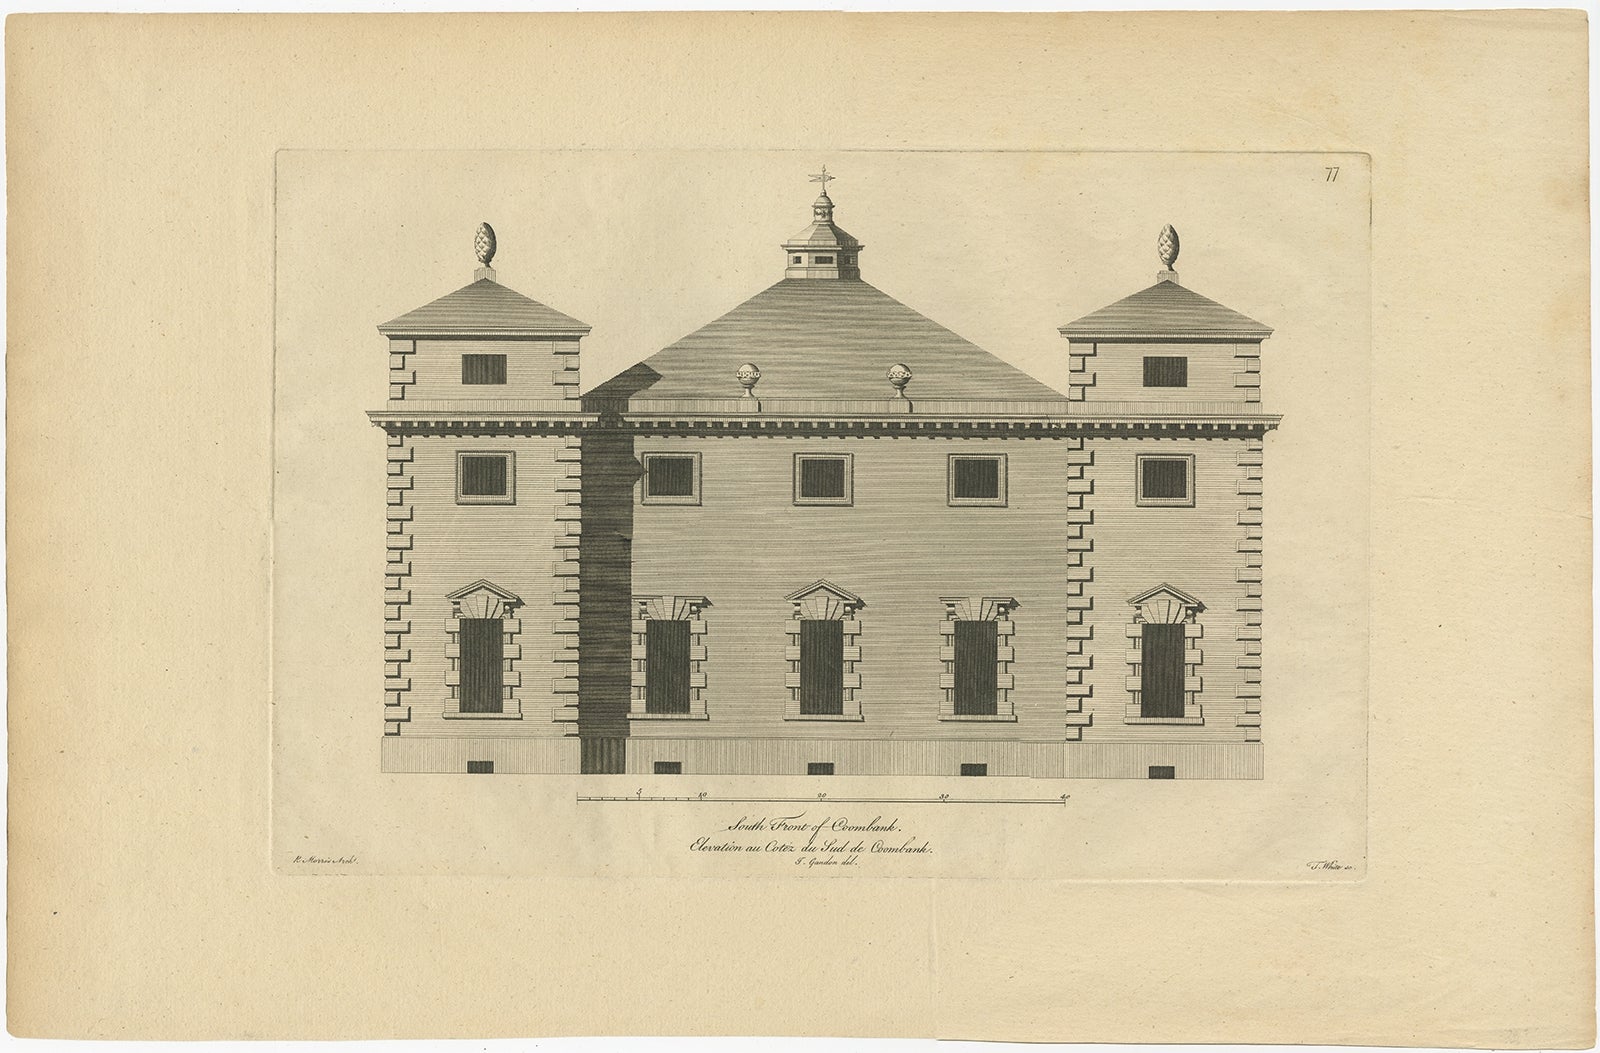 Antique print titled 'South Front of Coombank'. Southern facade of Coombank, Duke of Argyle's mansion. 

This print originates from 'Vitruvius Britannicus' by Colen Campbell. Artists and Engravers: Colen Campbell's Vitruvius Britannicus is